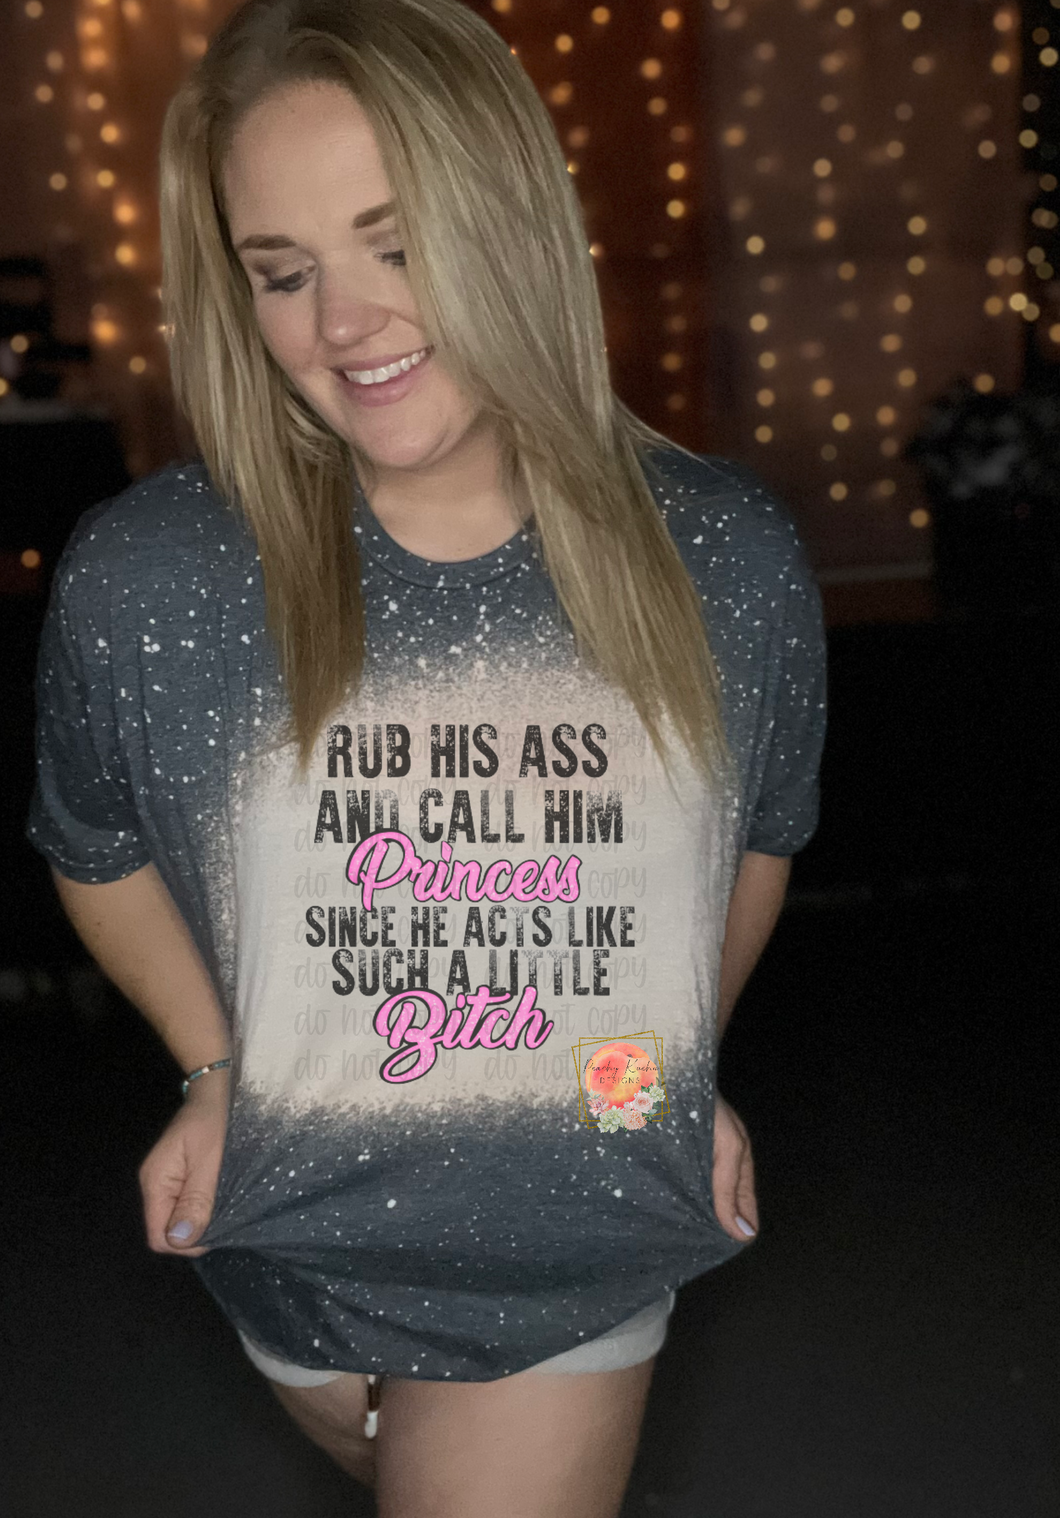 Rub his ass and call him princess since he acts like such a little bitch bleached tee